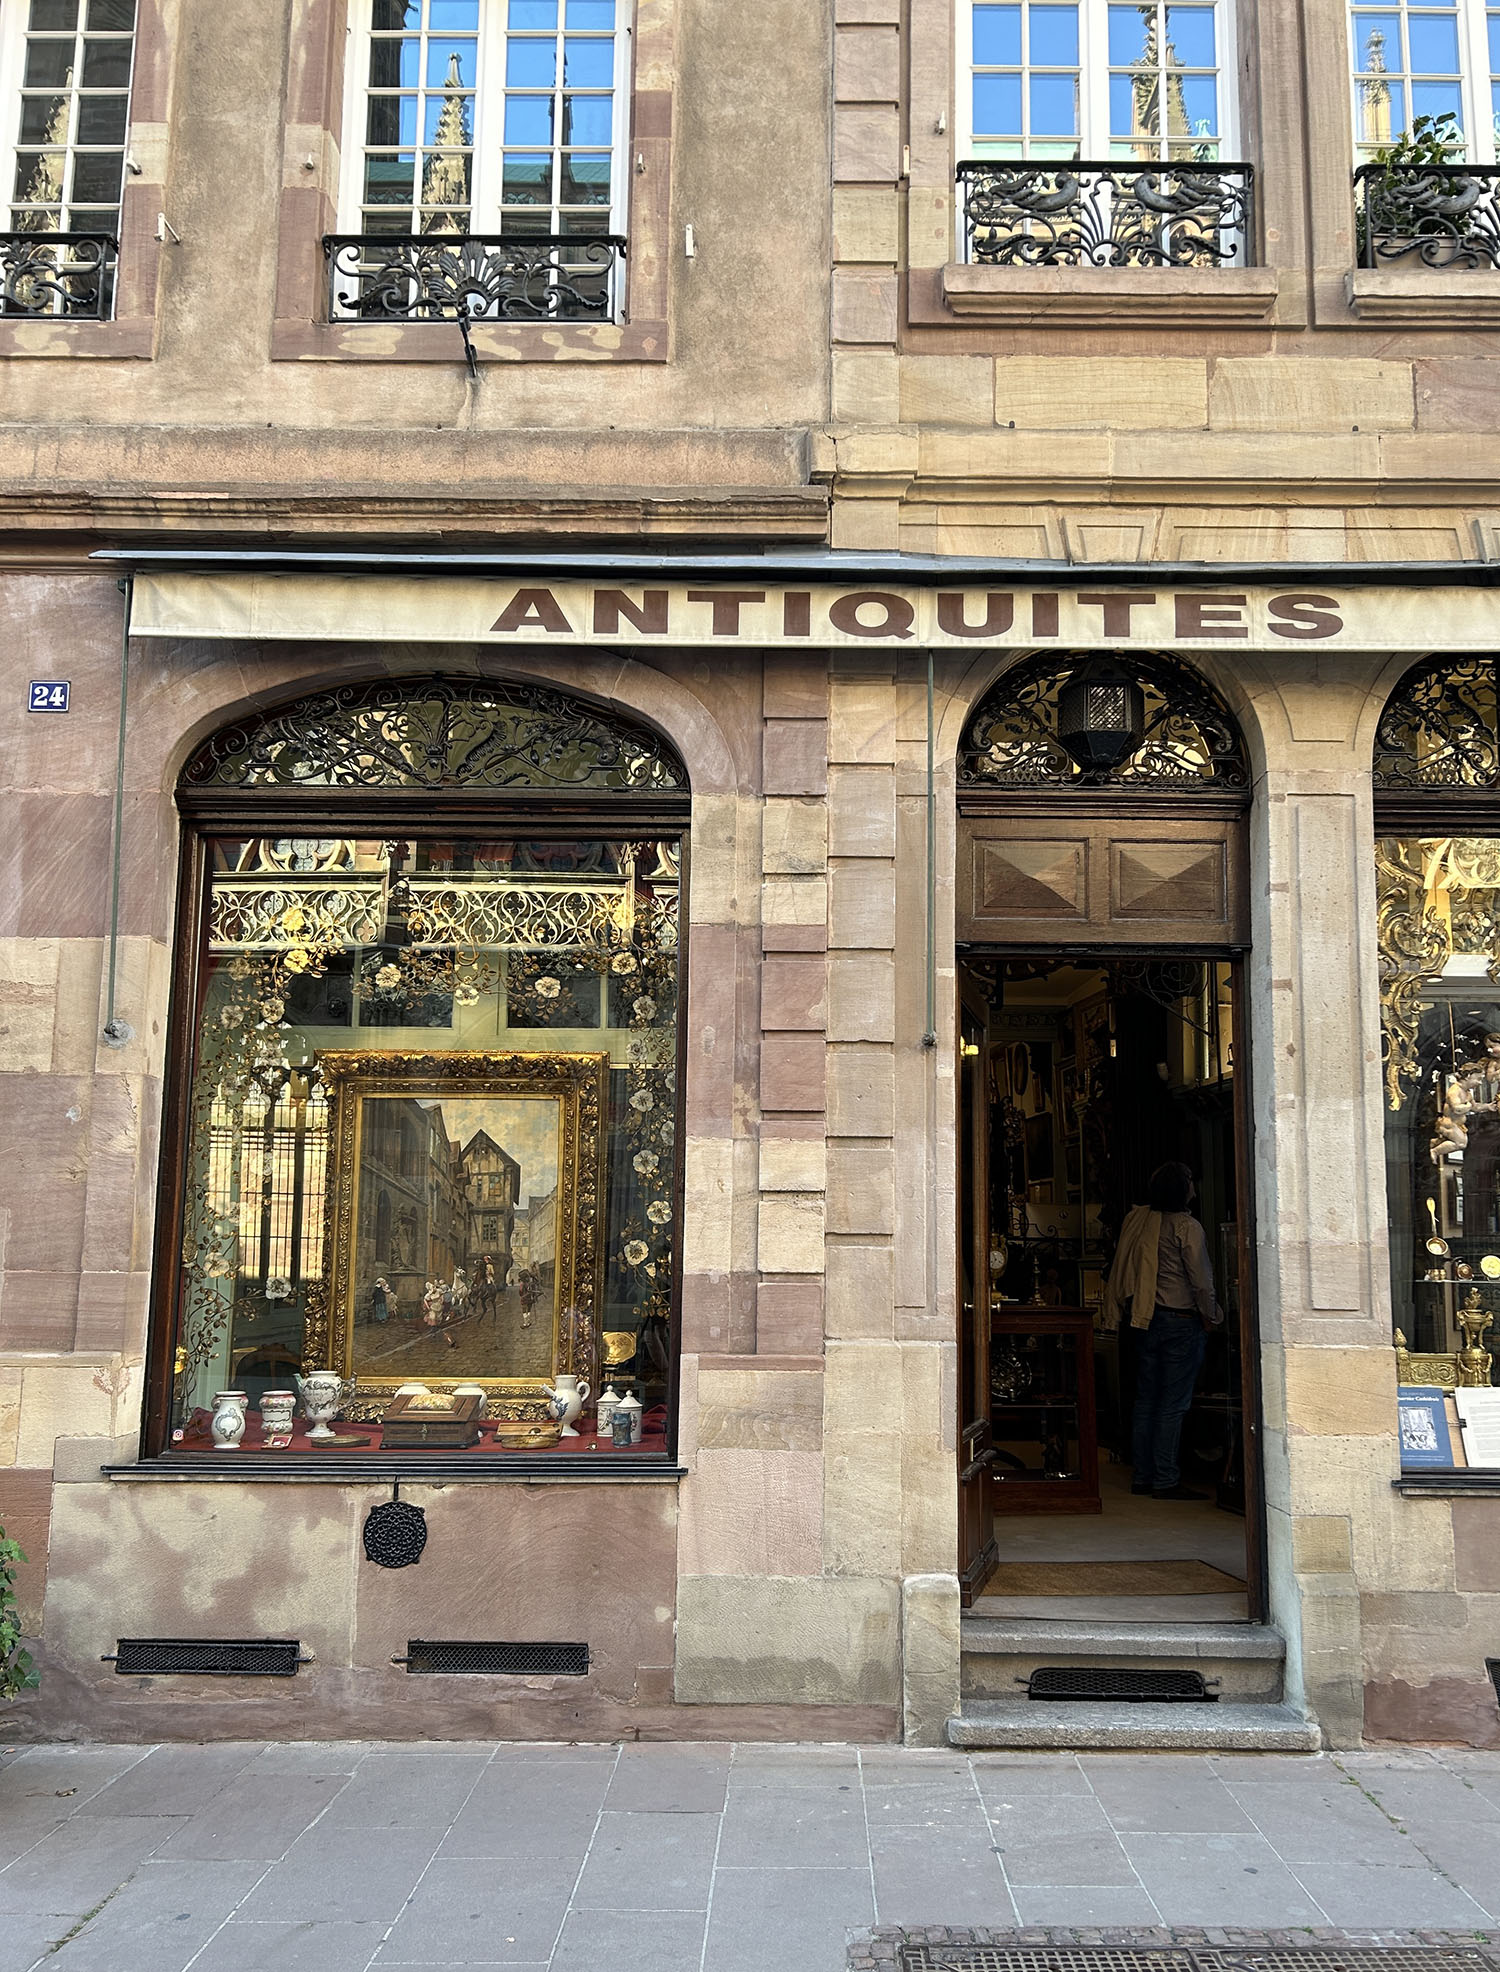 Coco & Voltaire - Antique store in Strasbourg, France